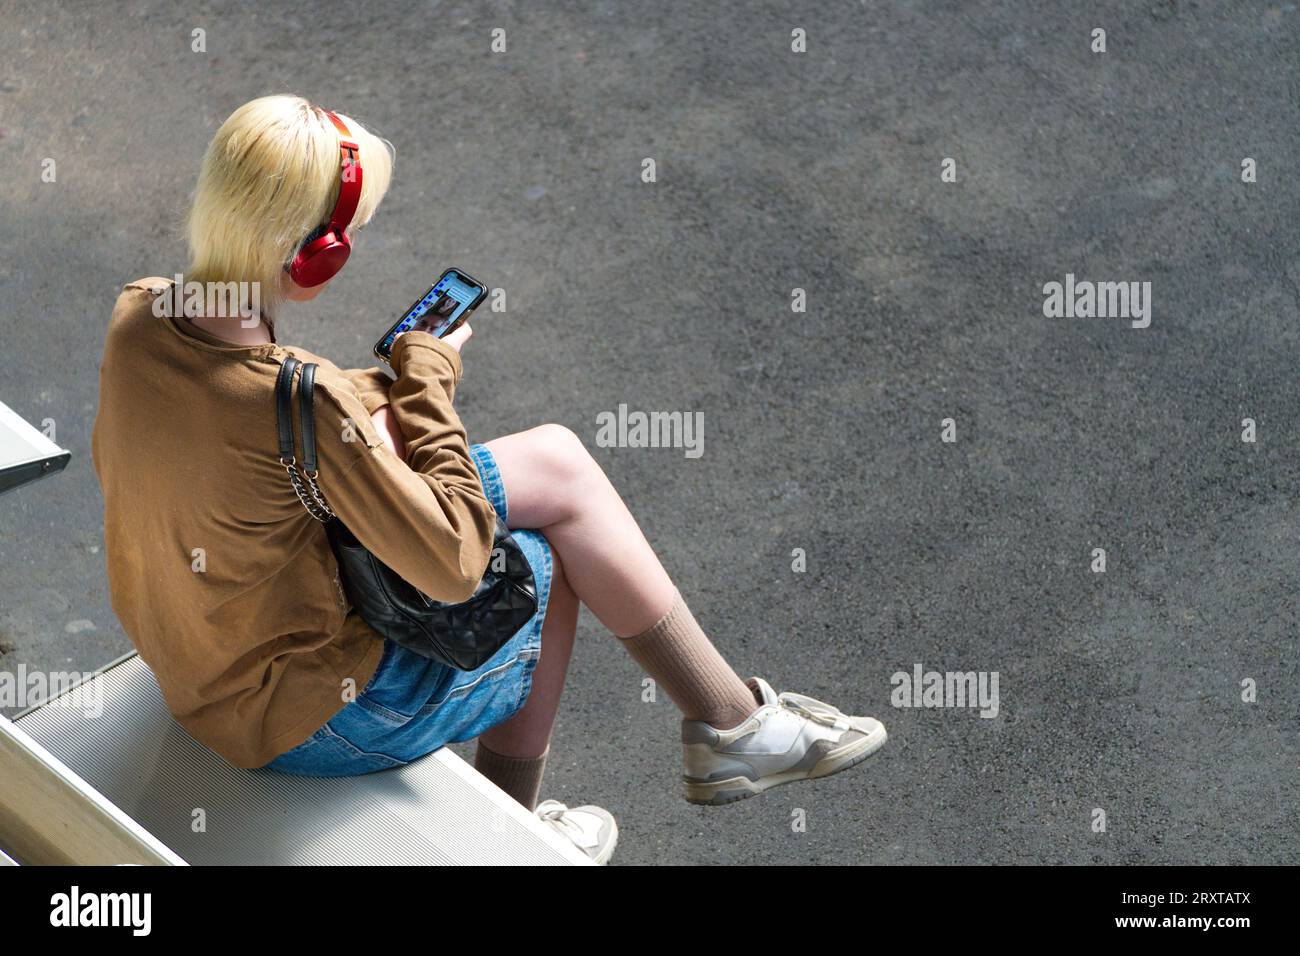 Young person looking at phone wearing headphones and sneakers sitting on seat using social media, in Melbourne city, Australia. Stock Photo